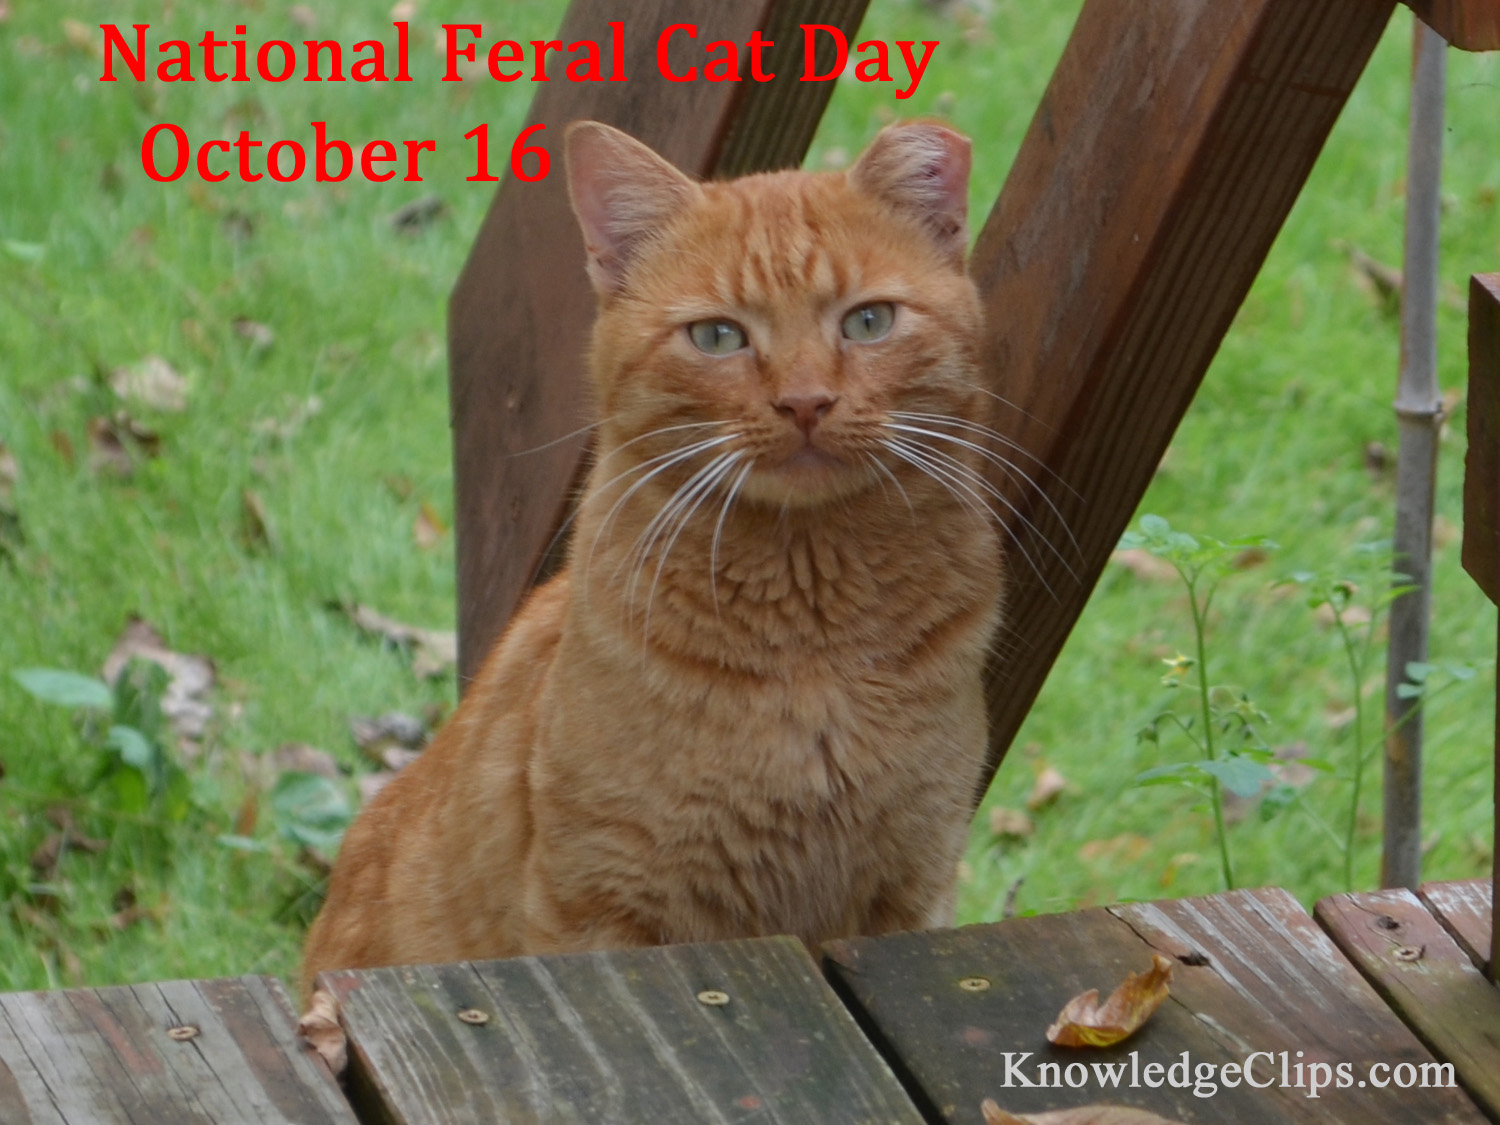 National Feral Cat Day - October 16